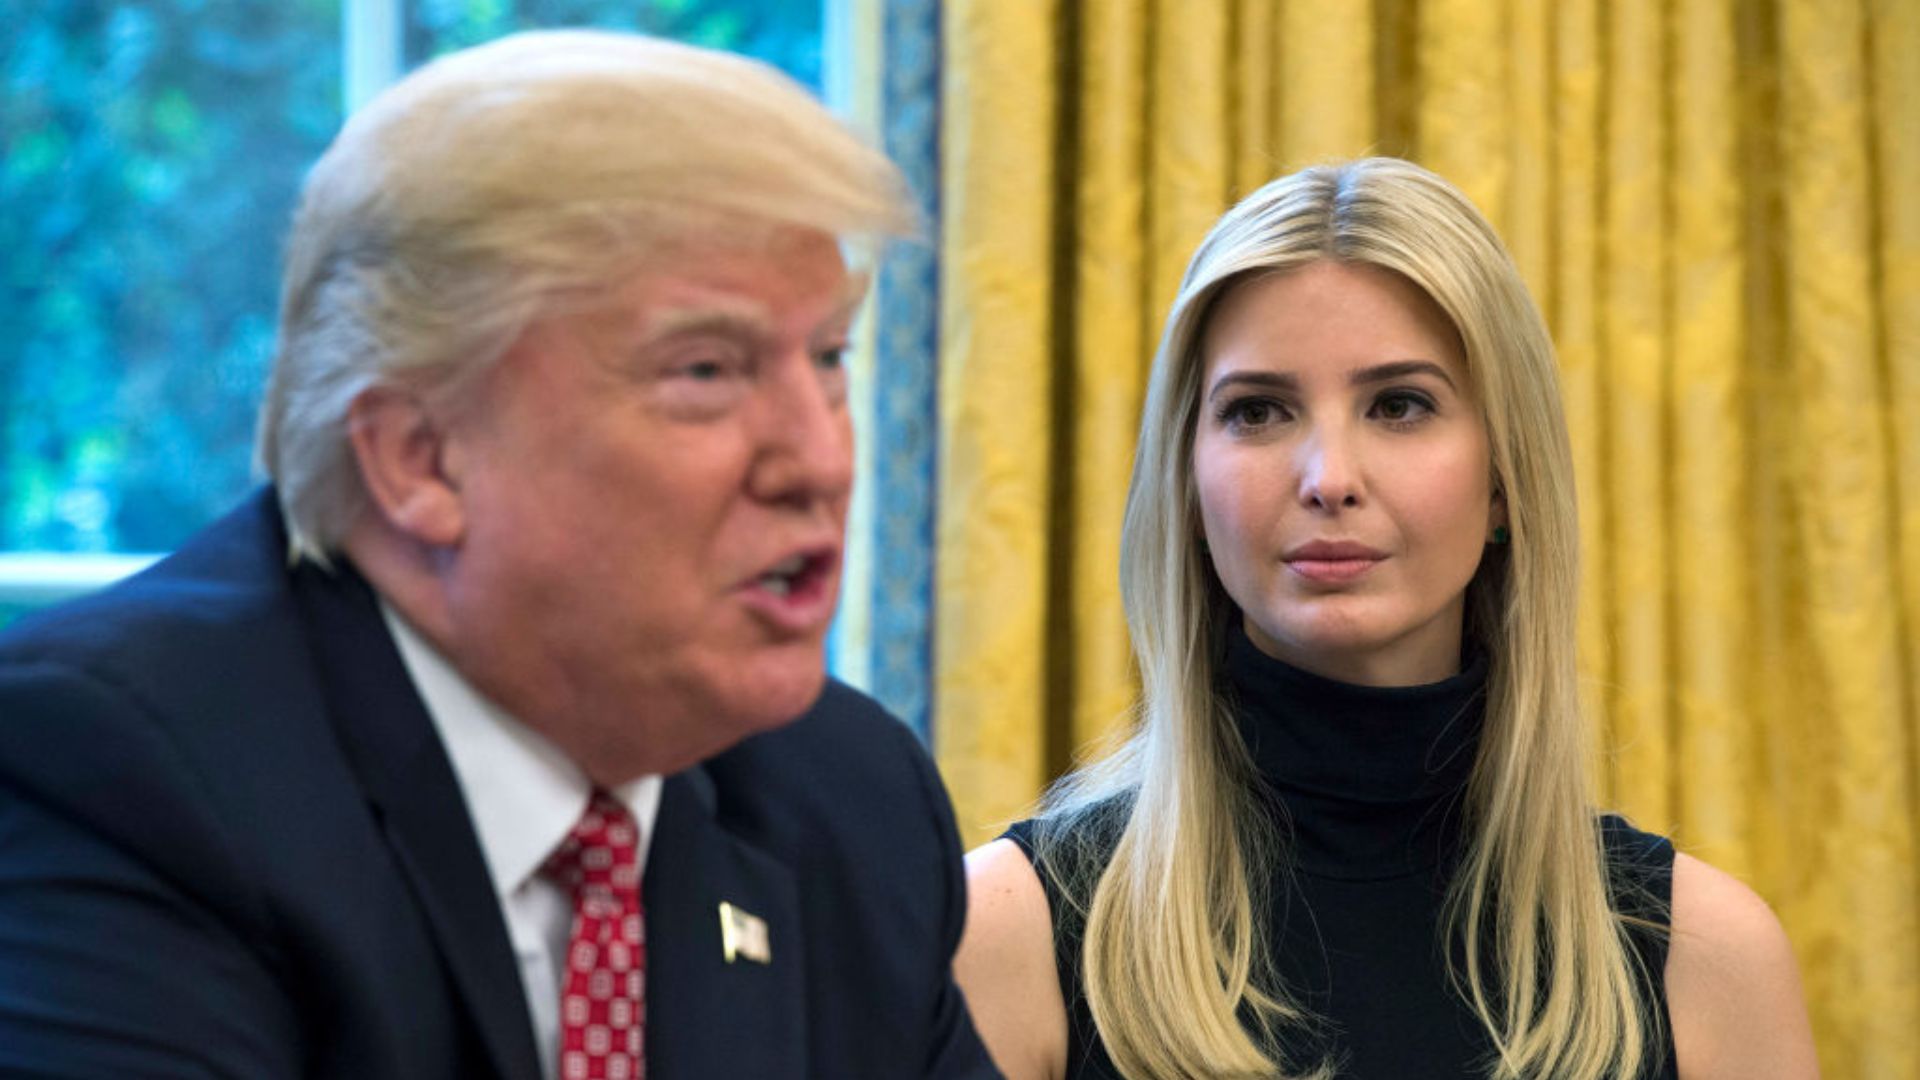 Donald Trump is captured mid-sentence with a focused expression, looking to the left. Next to him, Ivanka Trump looks ahead